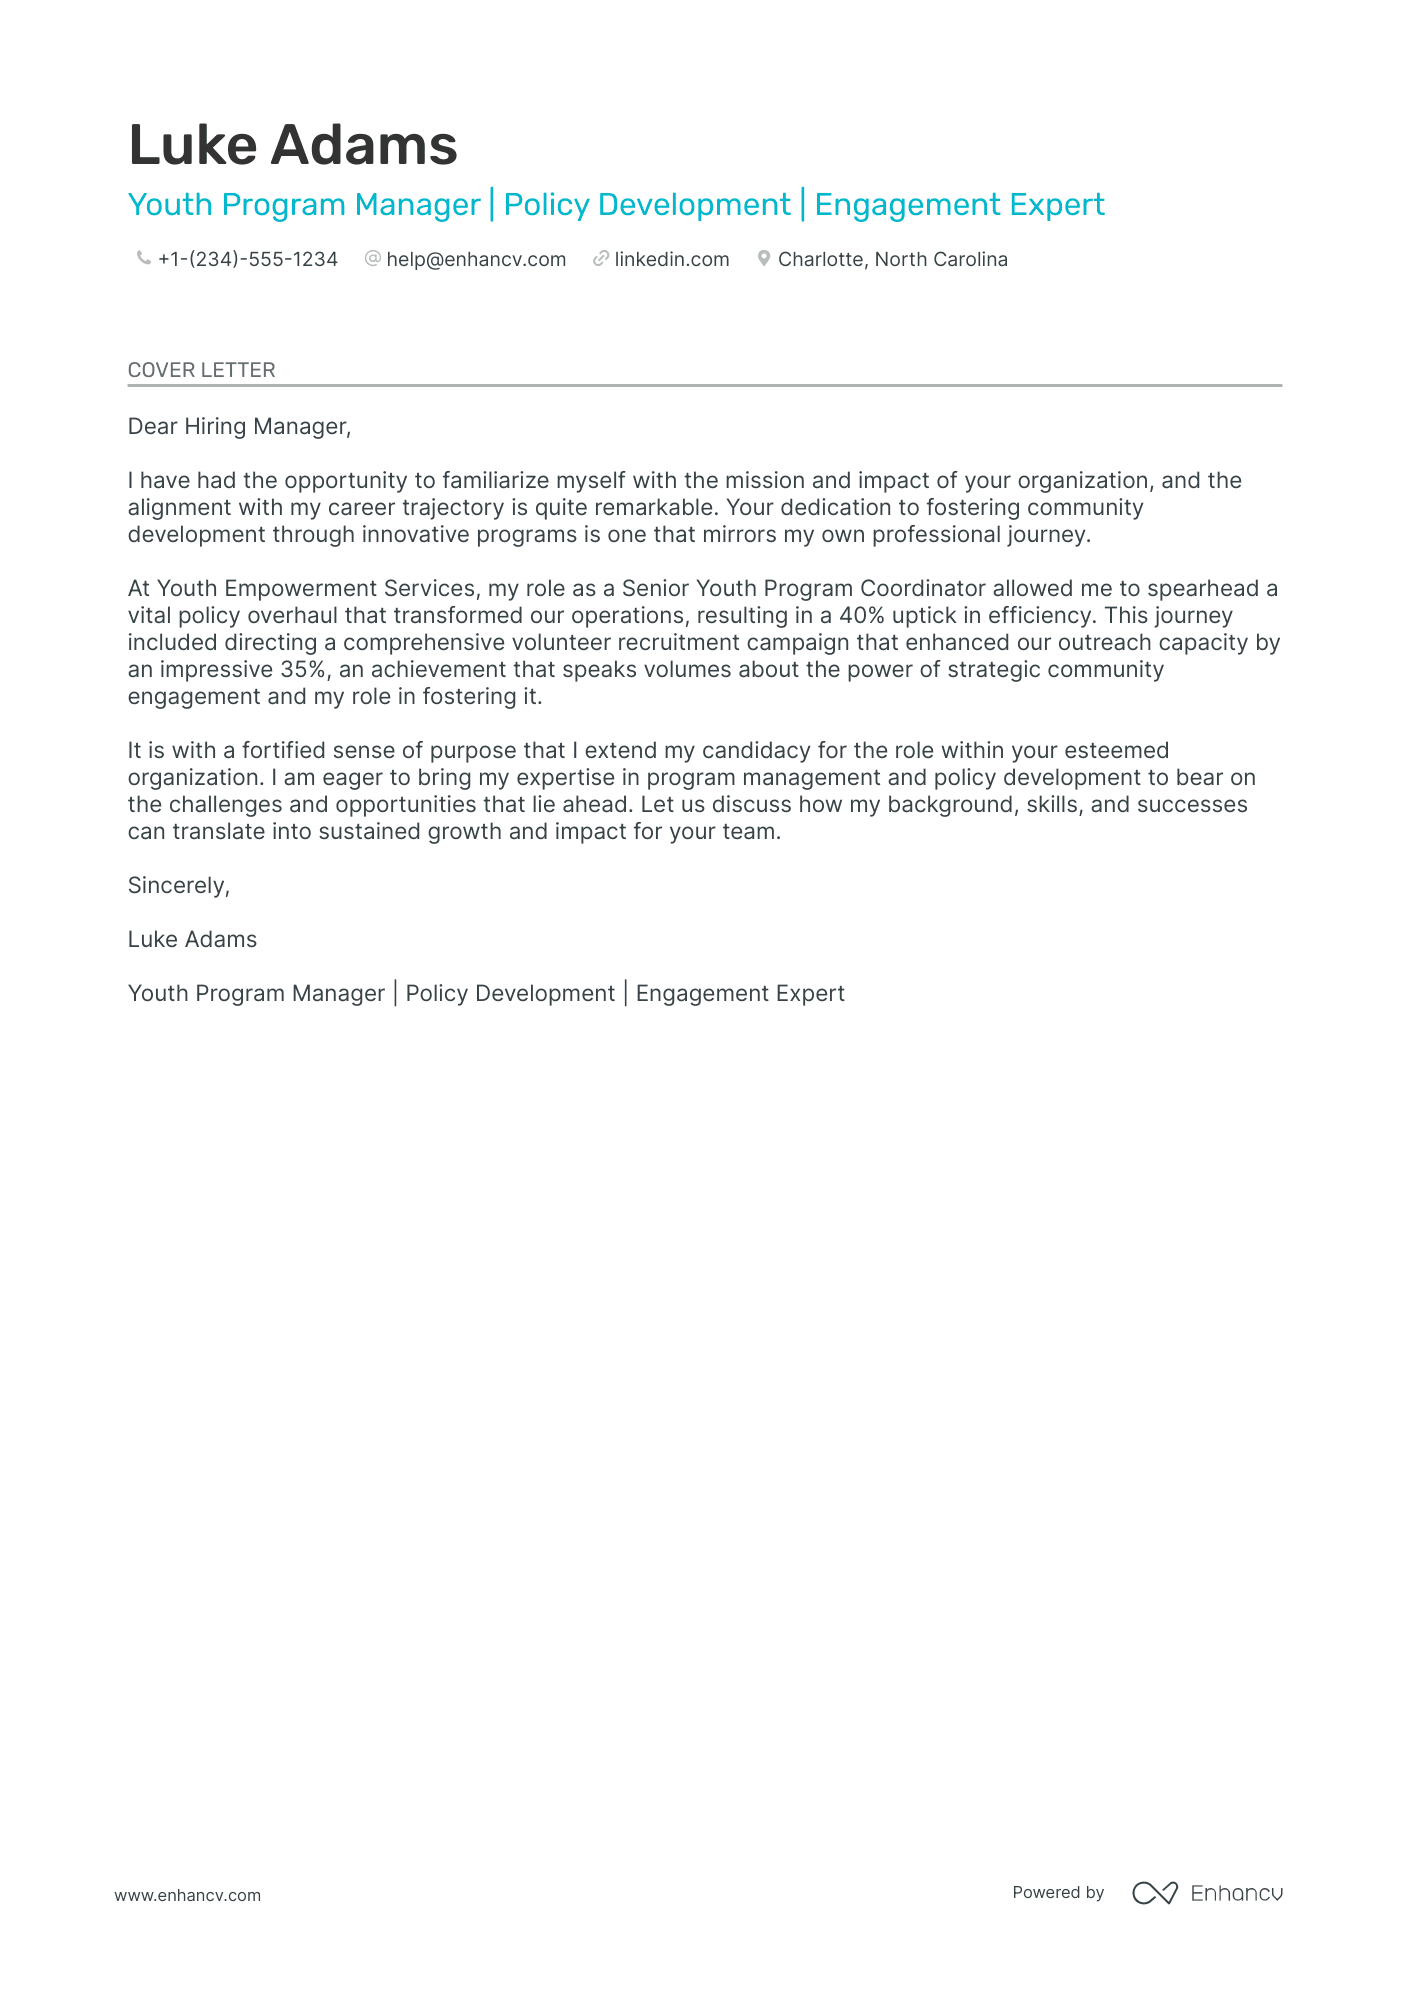 Youth Program Manager cover letter